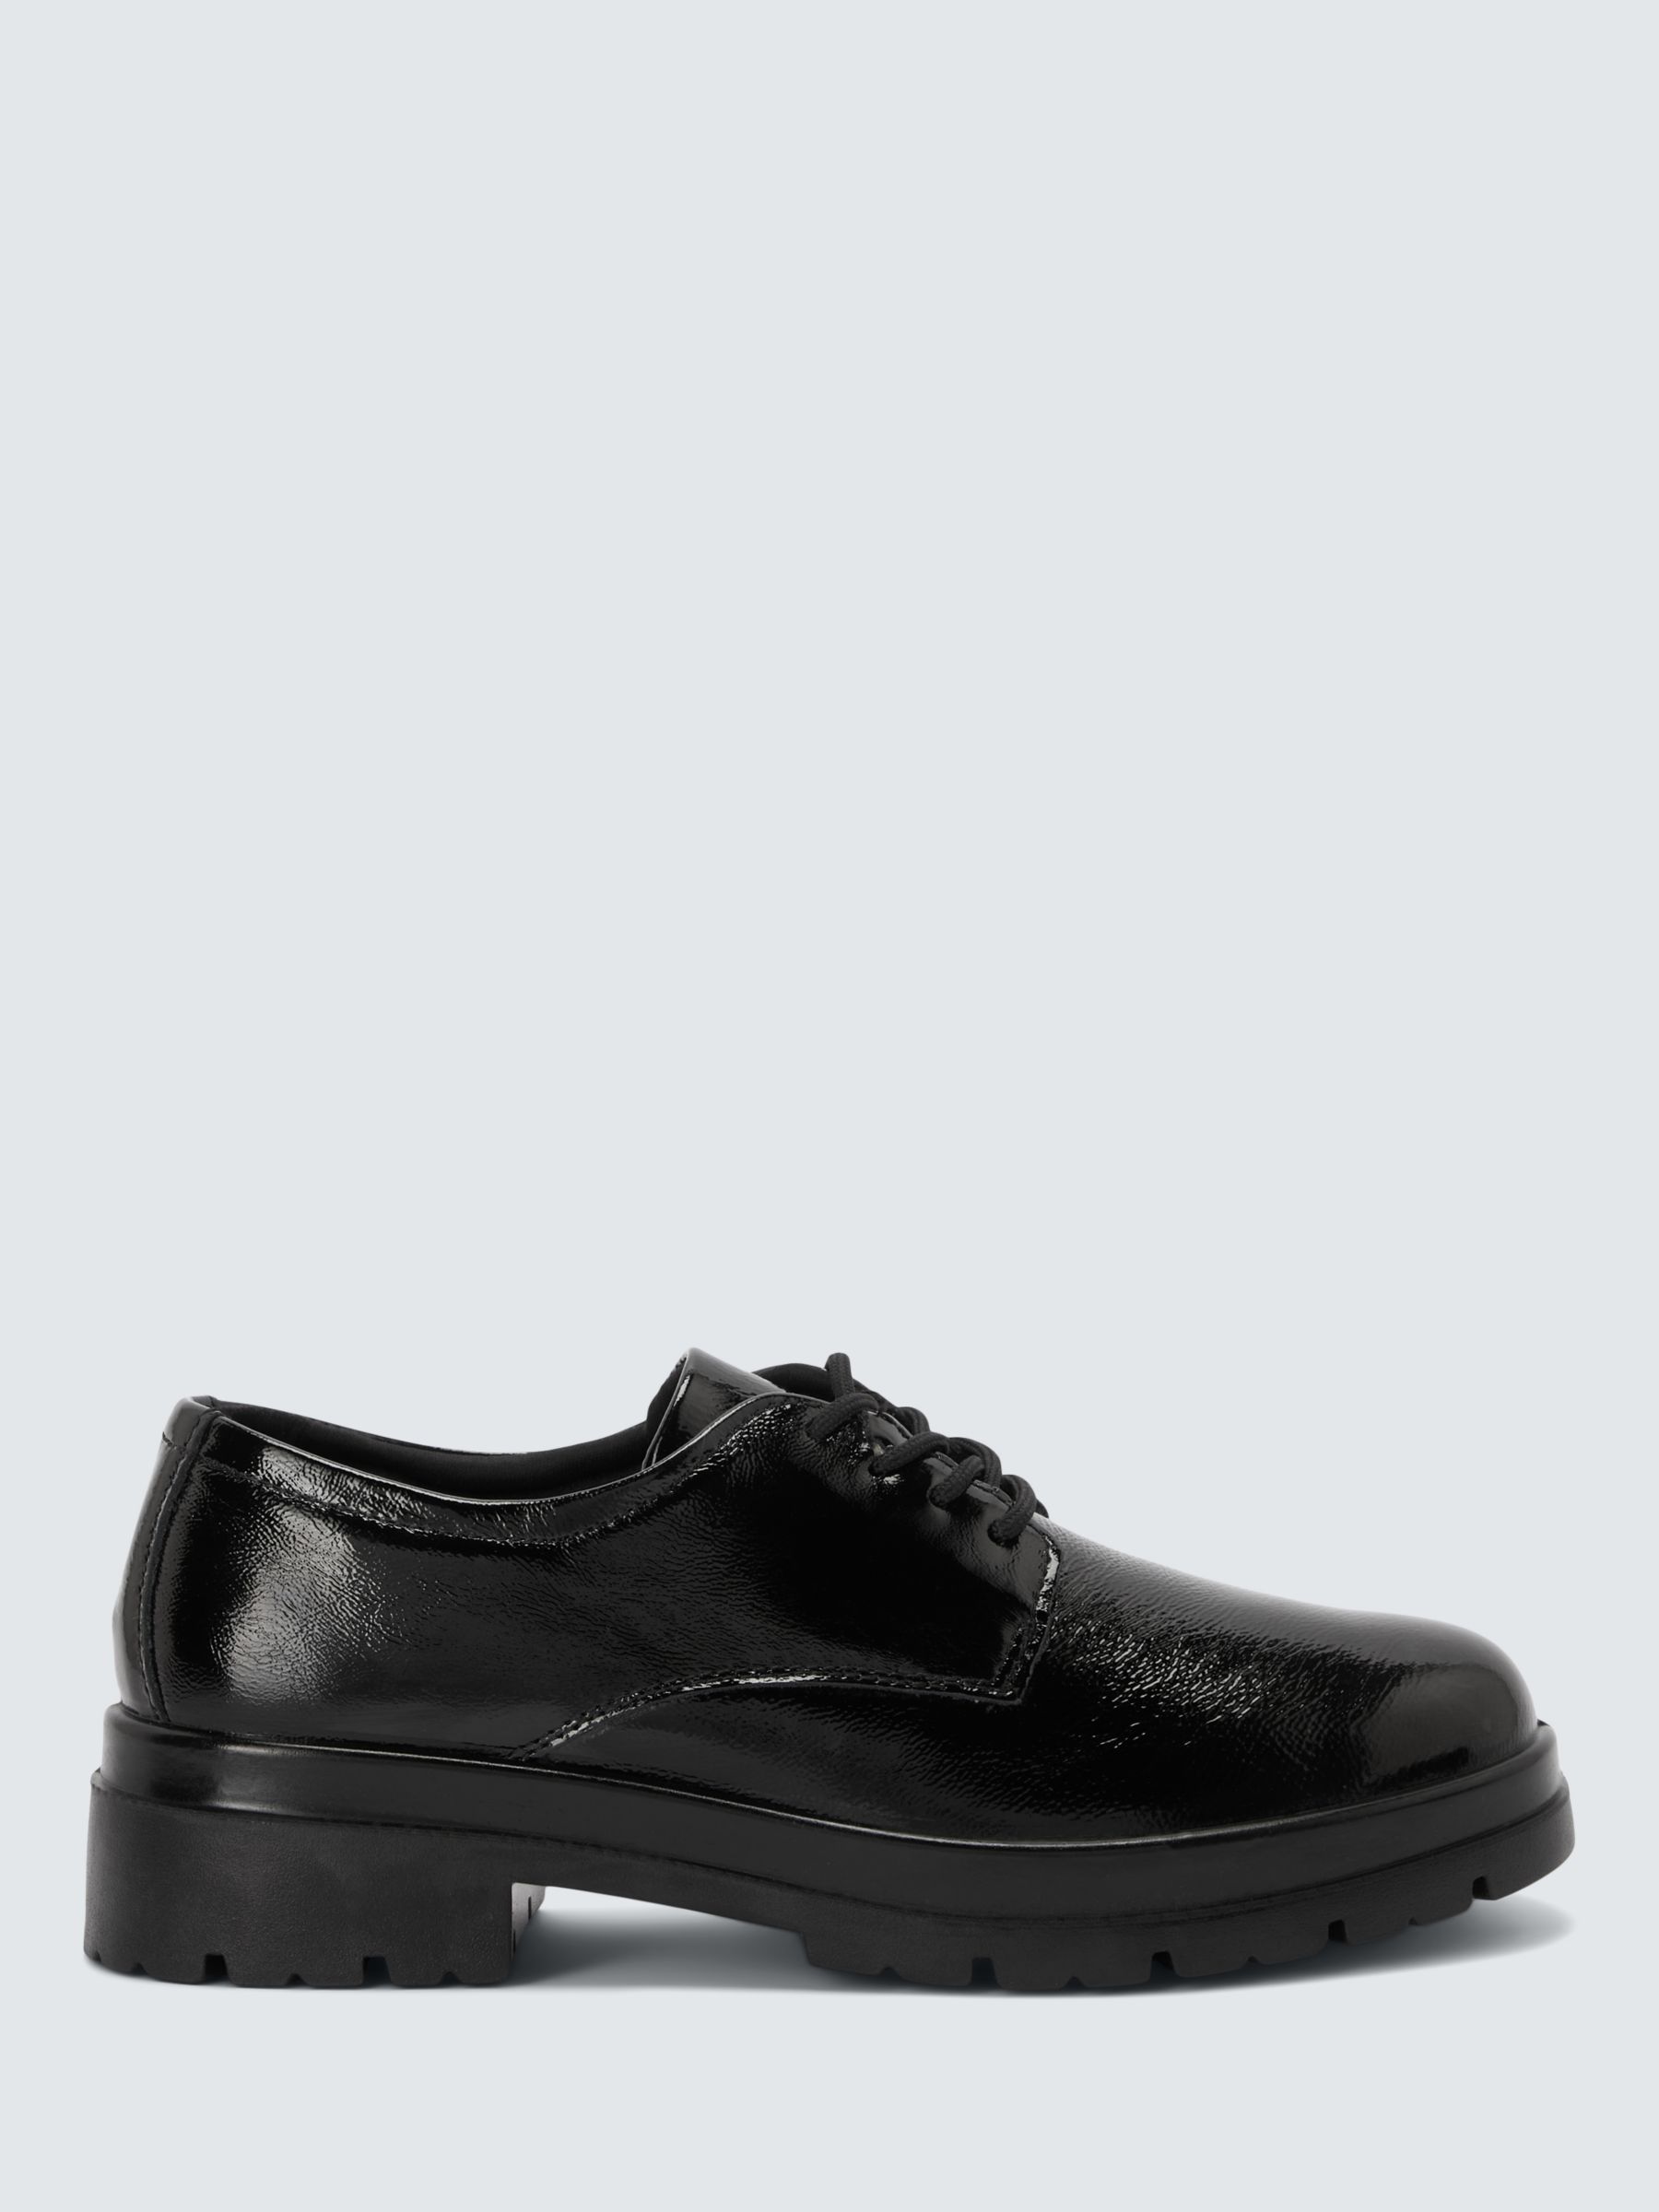 John Lewis Fifie Leather Comfort Lace Up Oxford Shoes, Black, 6